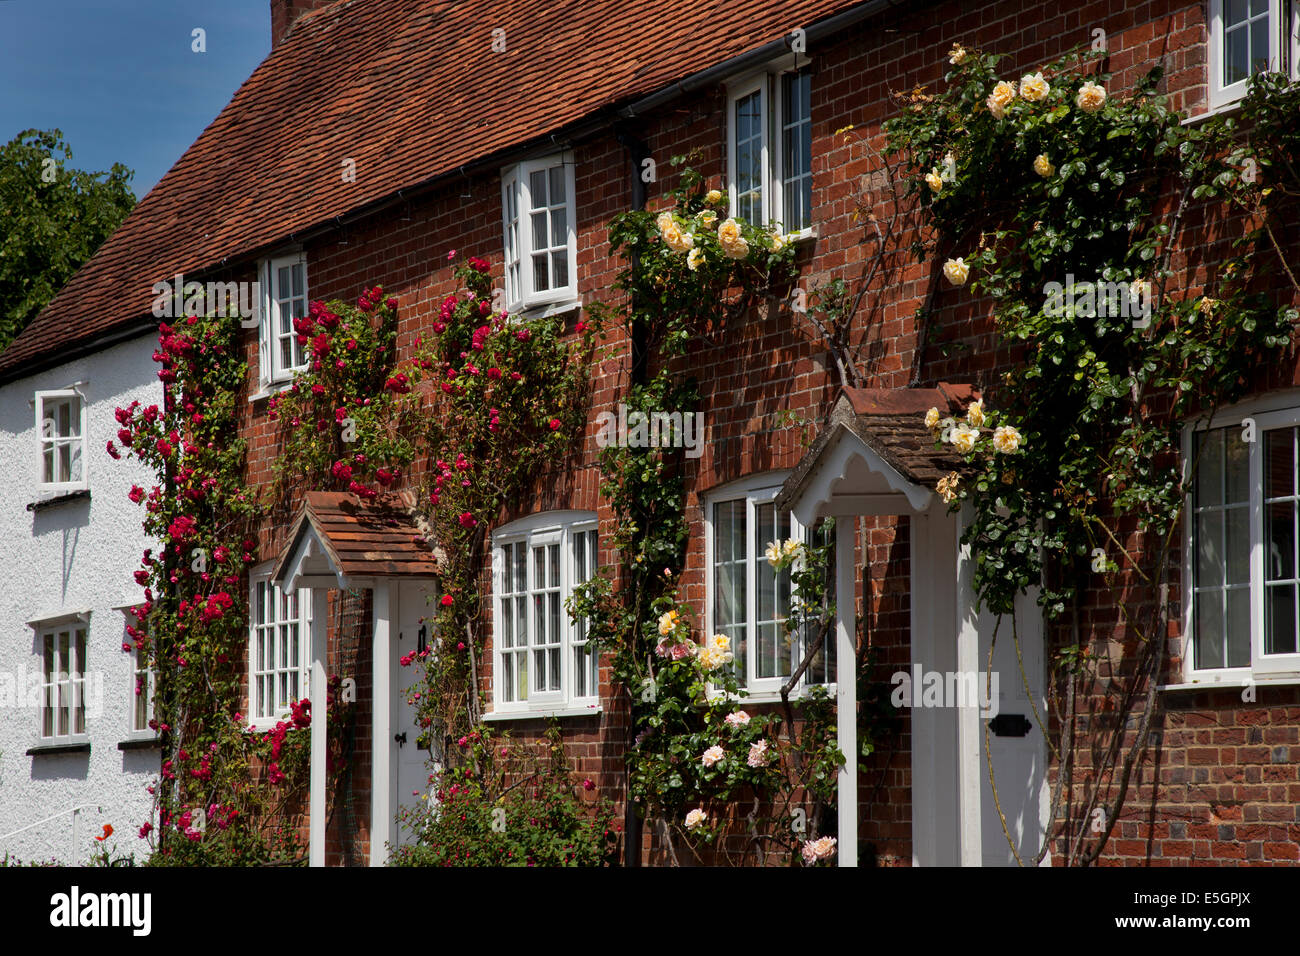 Cottages with summer roses over porch doorways in village of East Hendred,Oxfordshire,England Stock Photo